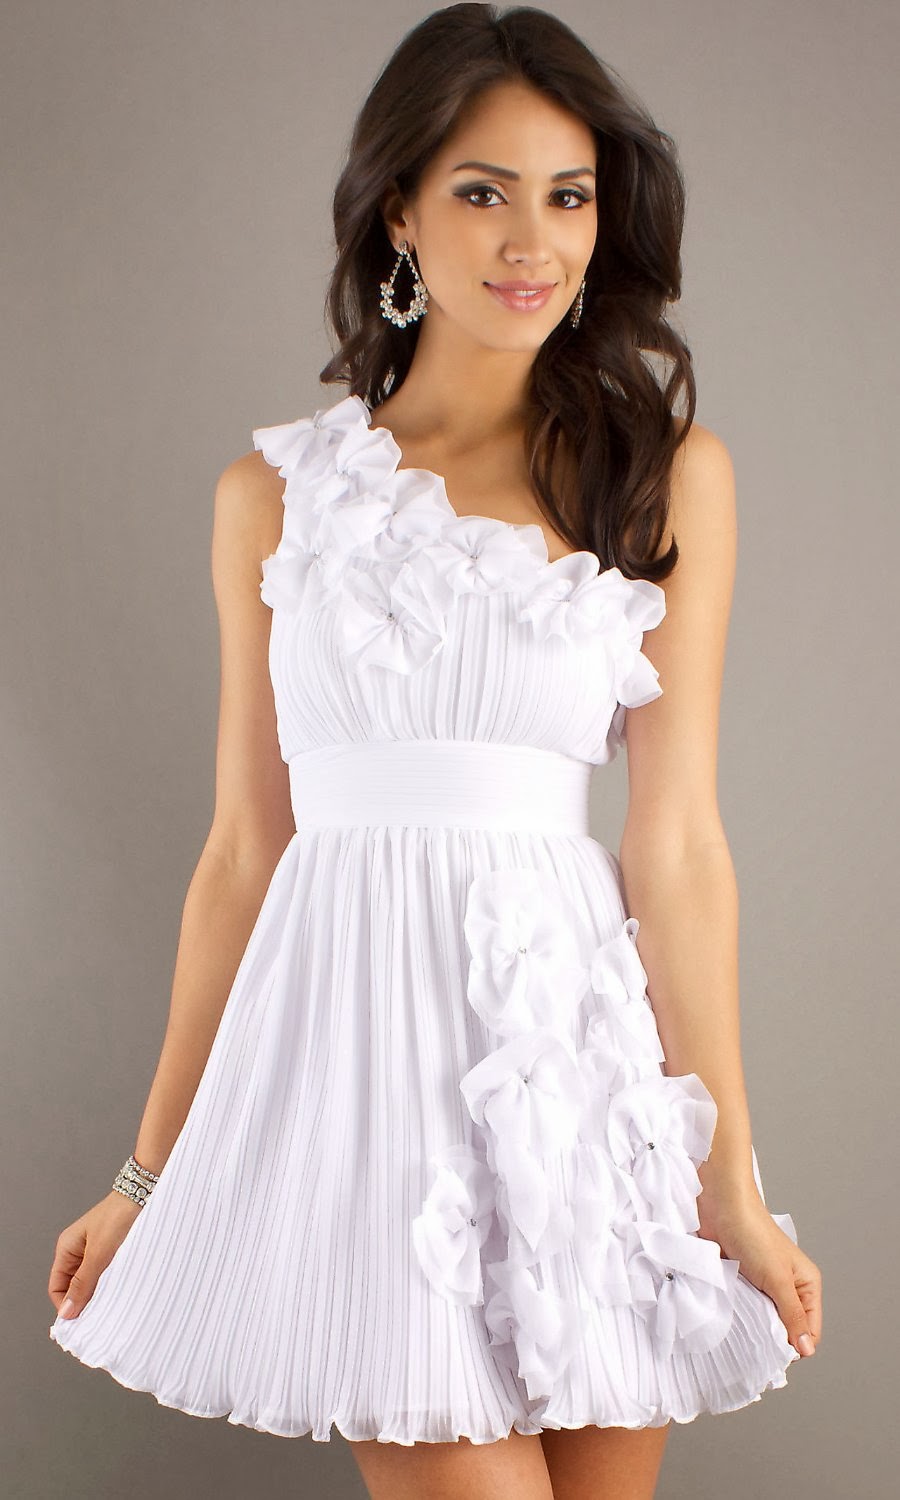 White Dress Pictures: February 2014